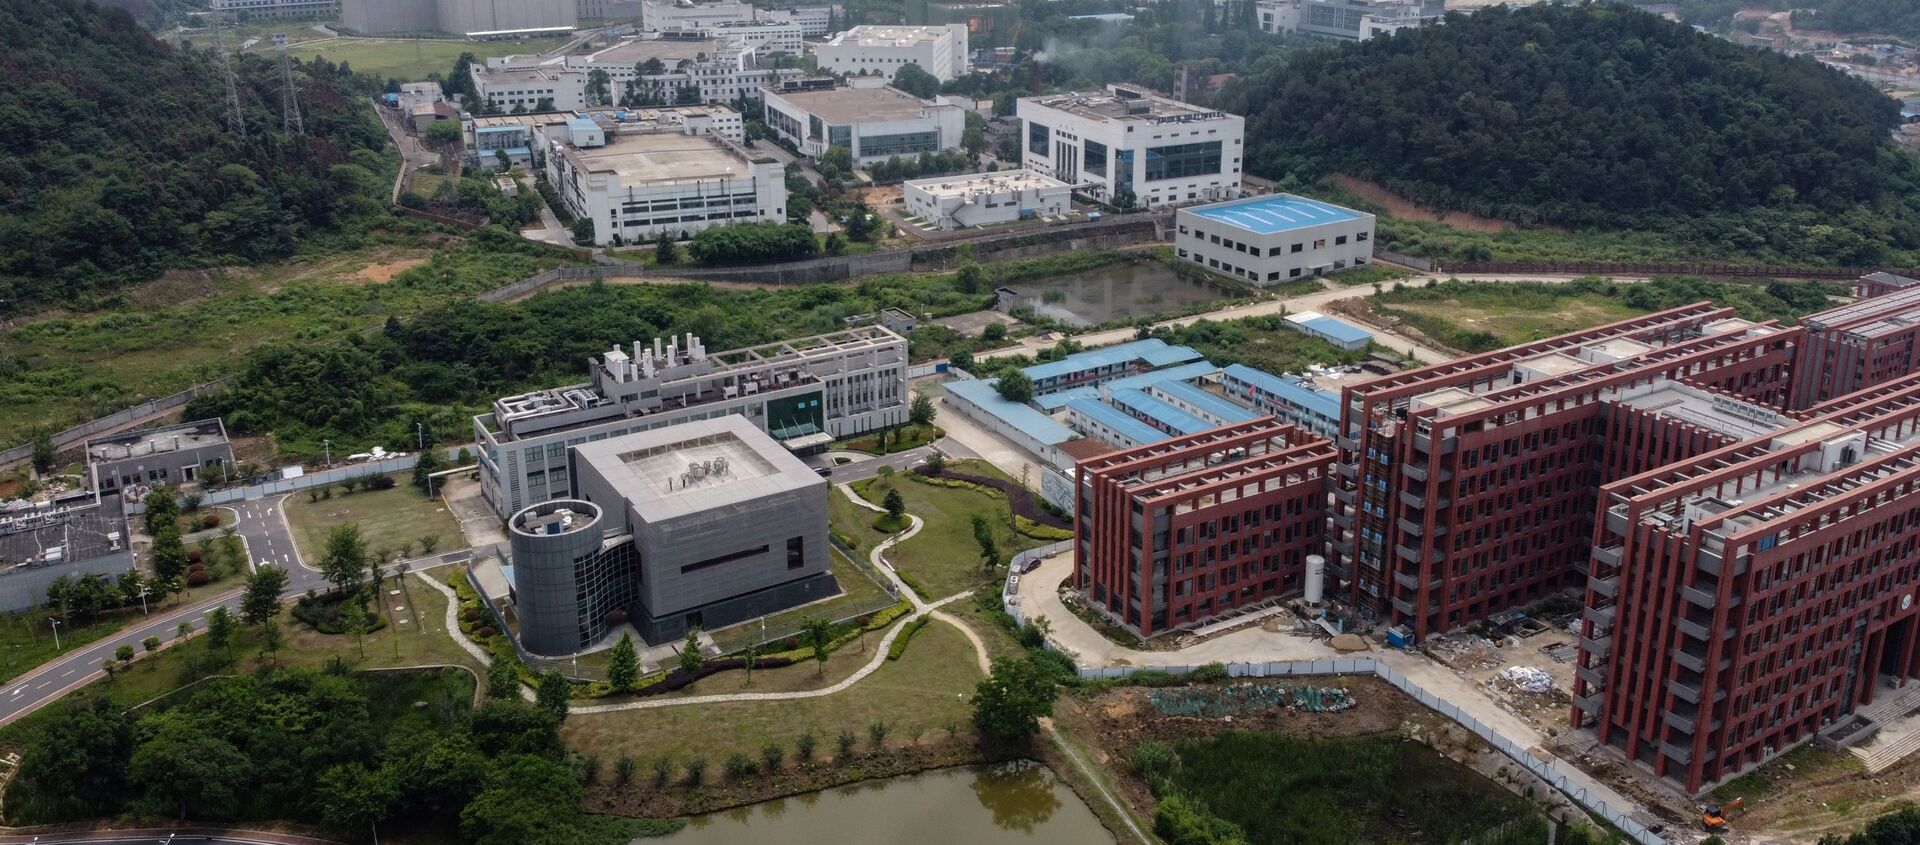 This aerial view shows the P4 laboratory (centre L) on the campus of the Wuhan Institute of Virology in Wuhan in China's central Hubei province on May 27, 2020. - Sputnik International, 1920, 04.02.2021